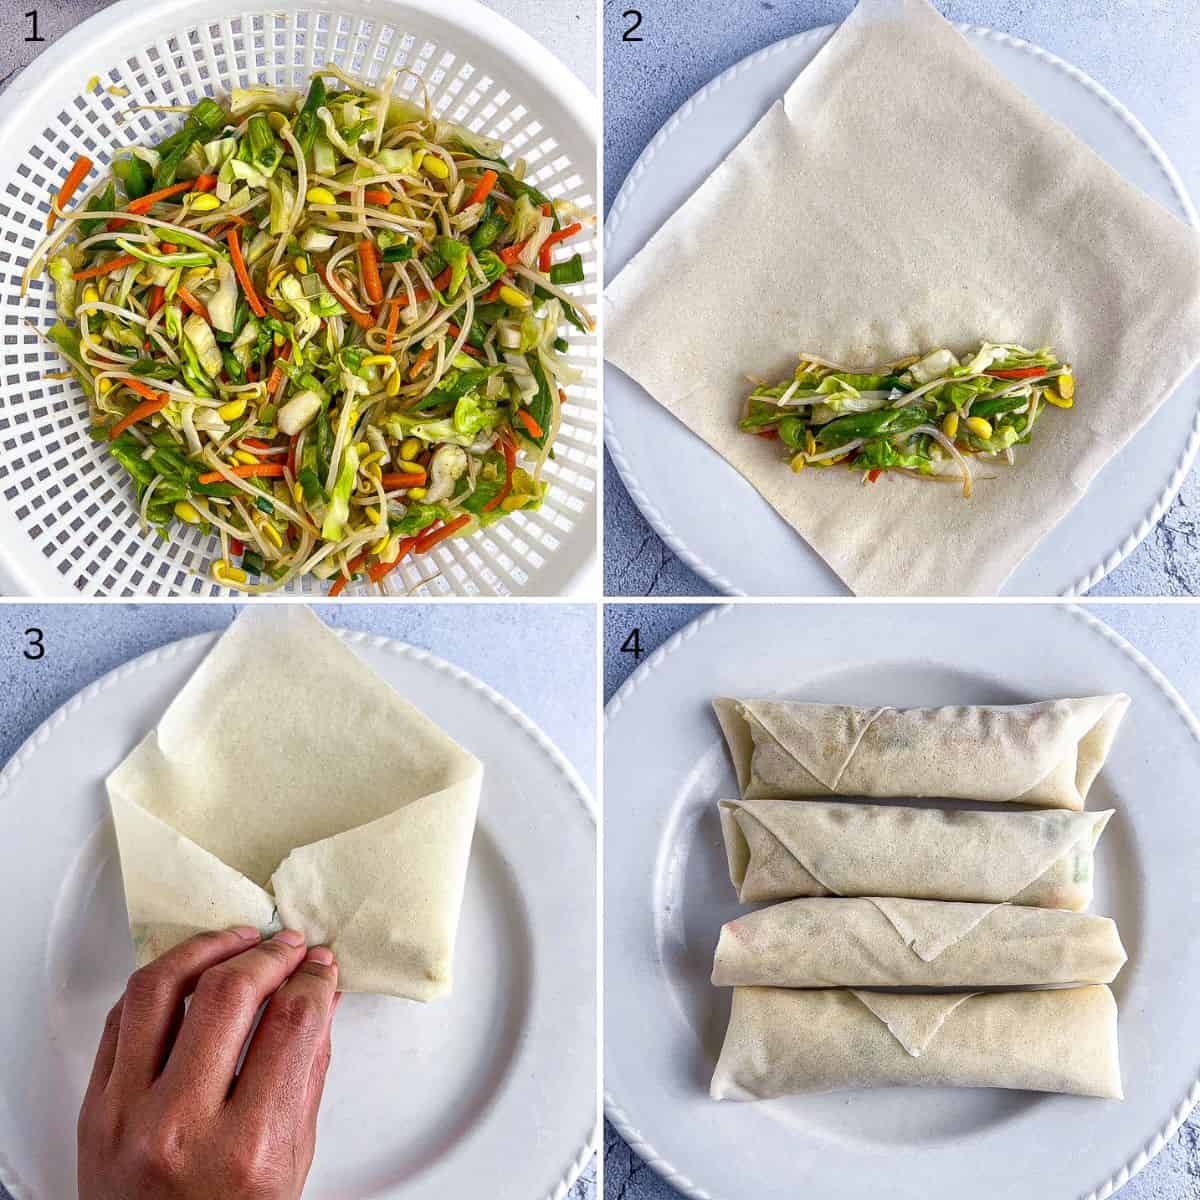 Step by step photo on how to wrap a lumpia.